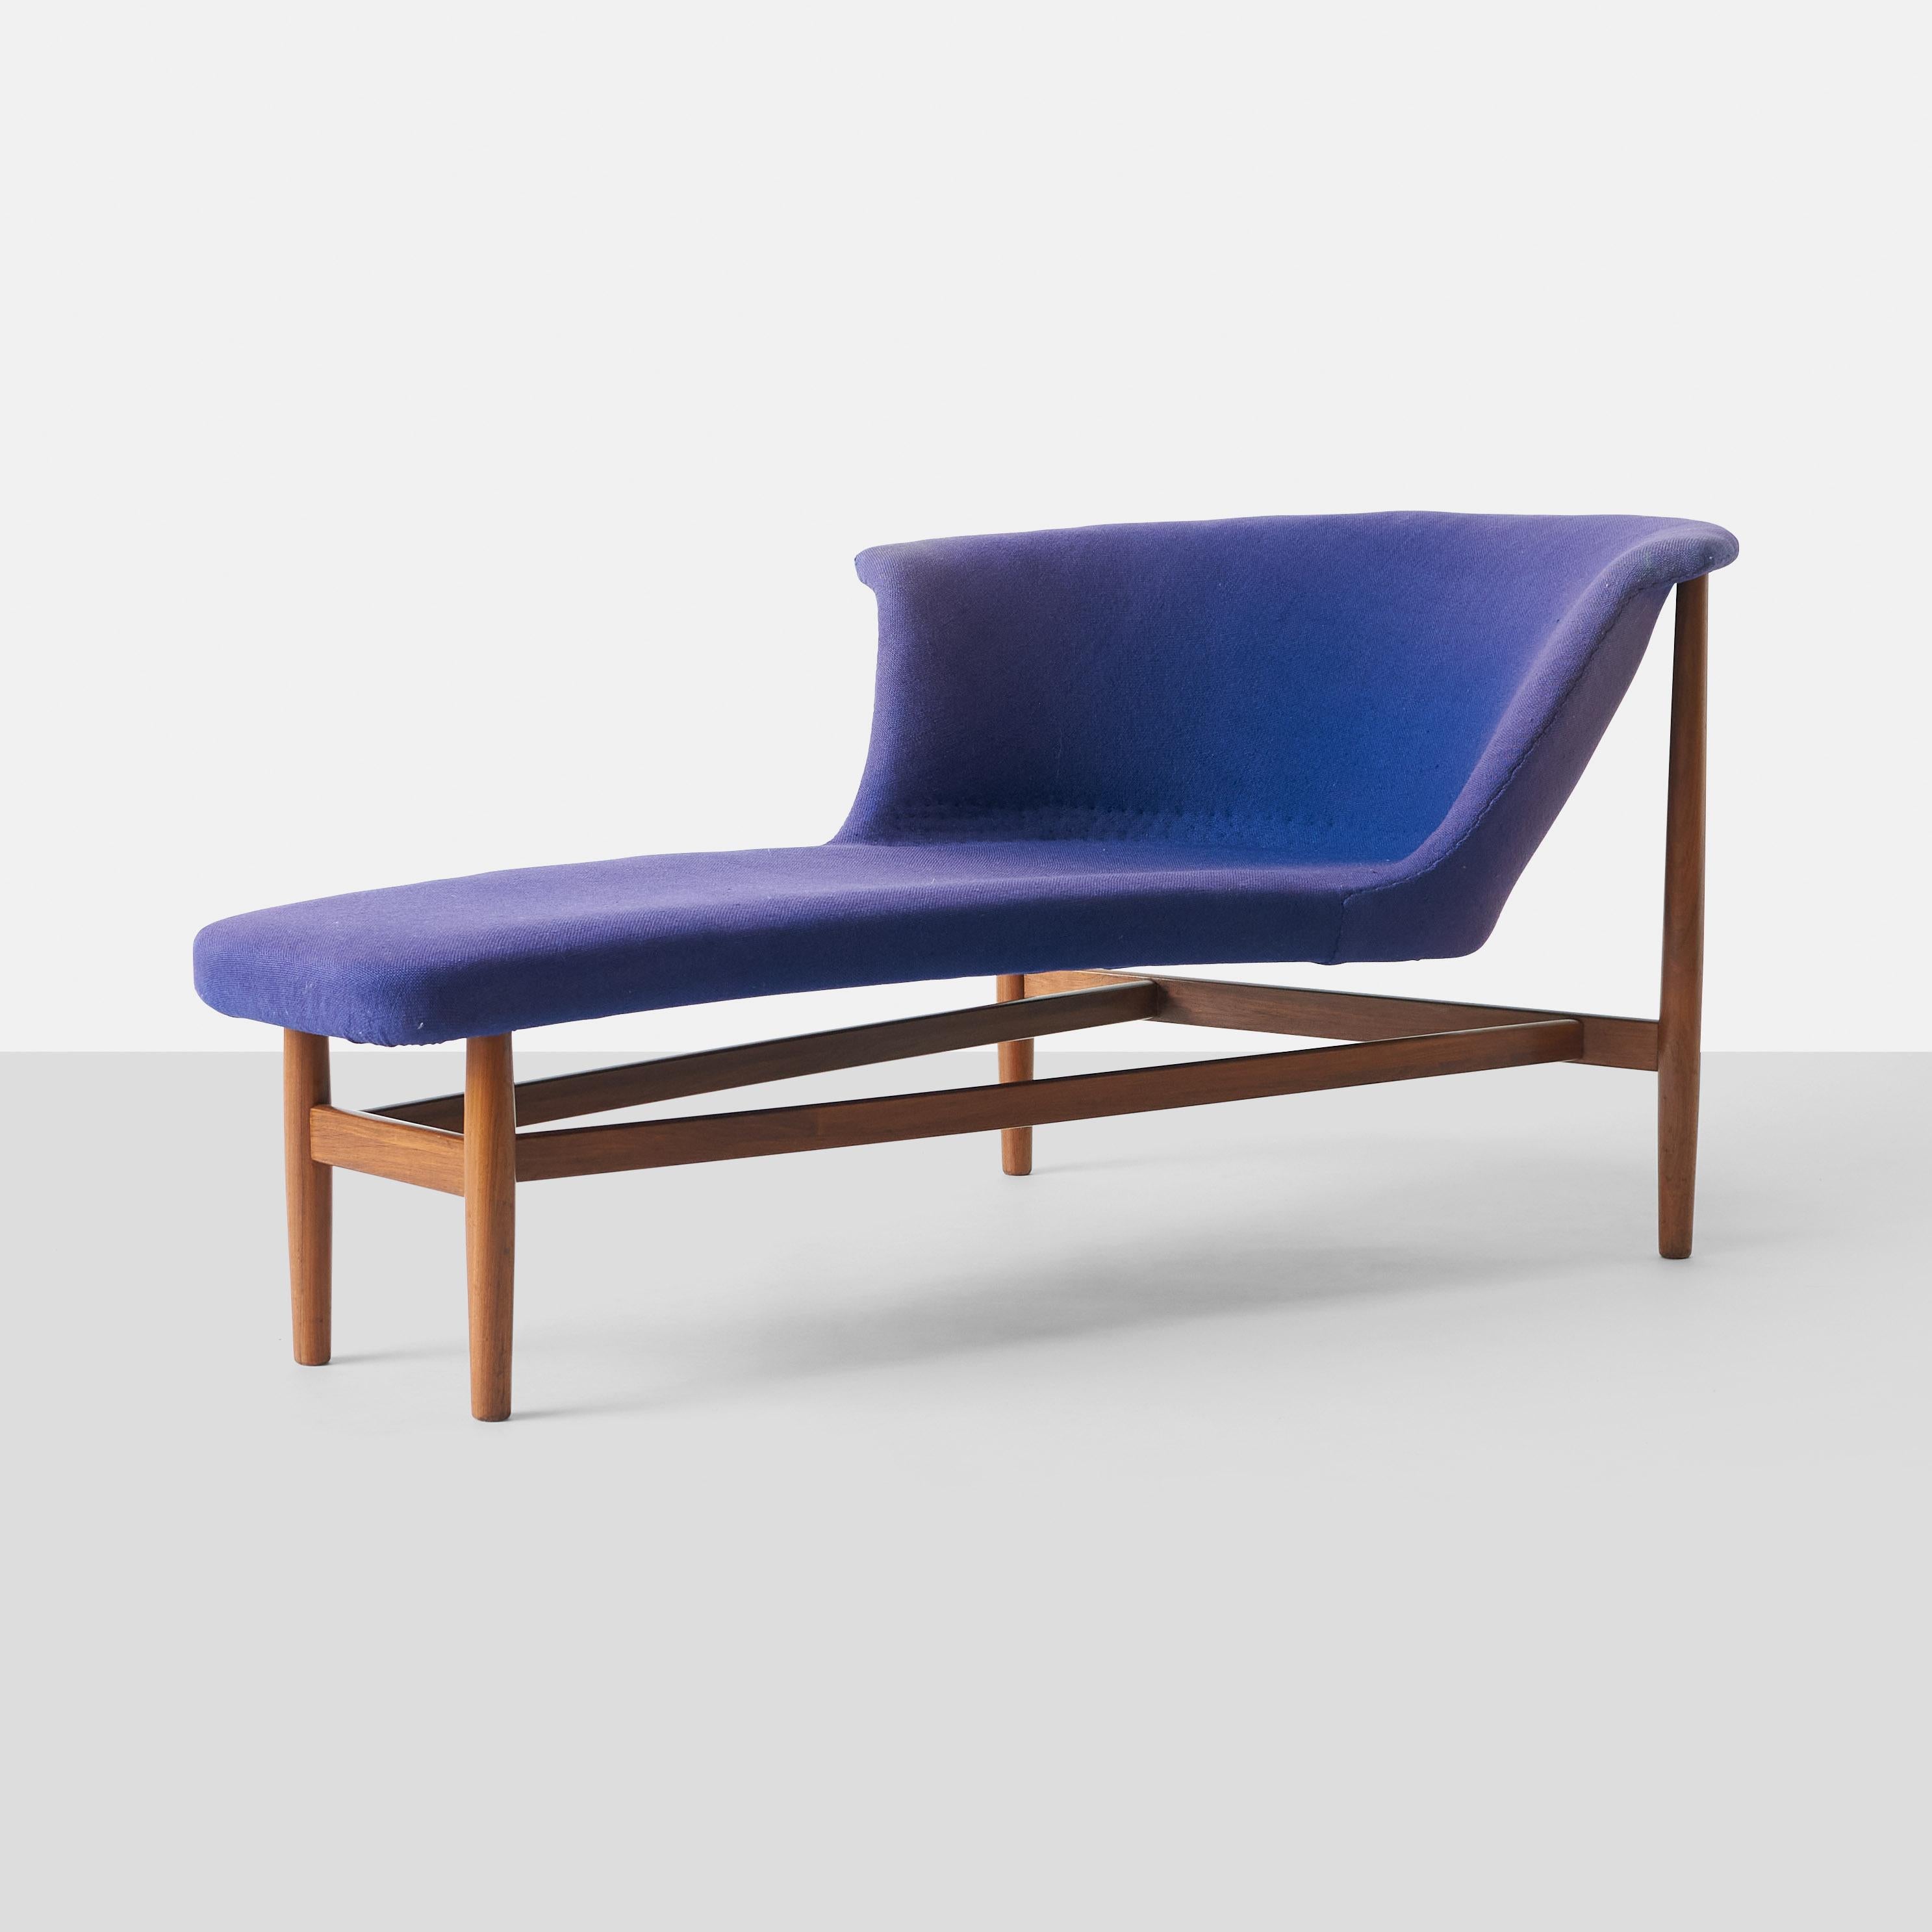 A rare and documented rosewood chaise lounge designed by Nanna Ditzel in 1951 for the Copenhagen Cabinetmakers Guild Exhibition at Designmuseum. The chaise is in beautiful original condition.